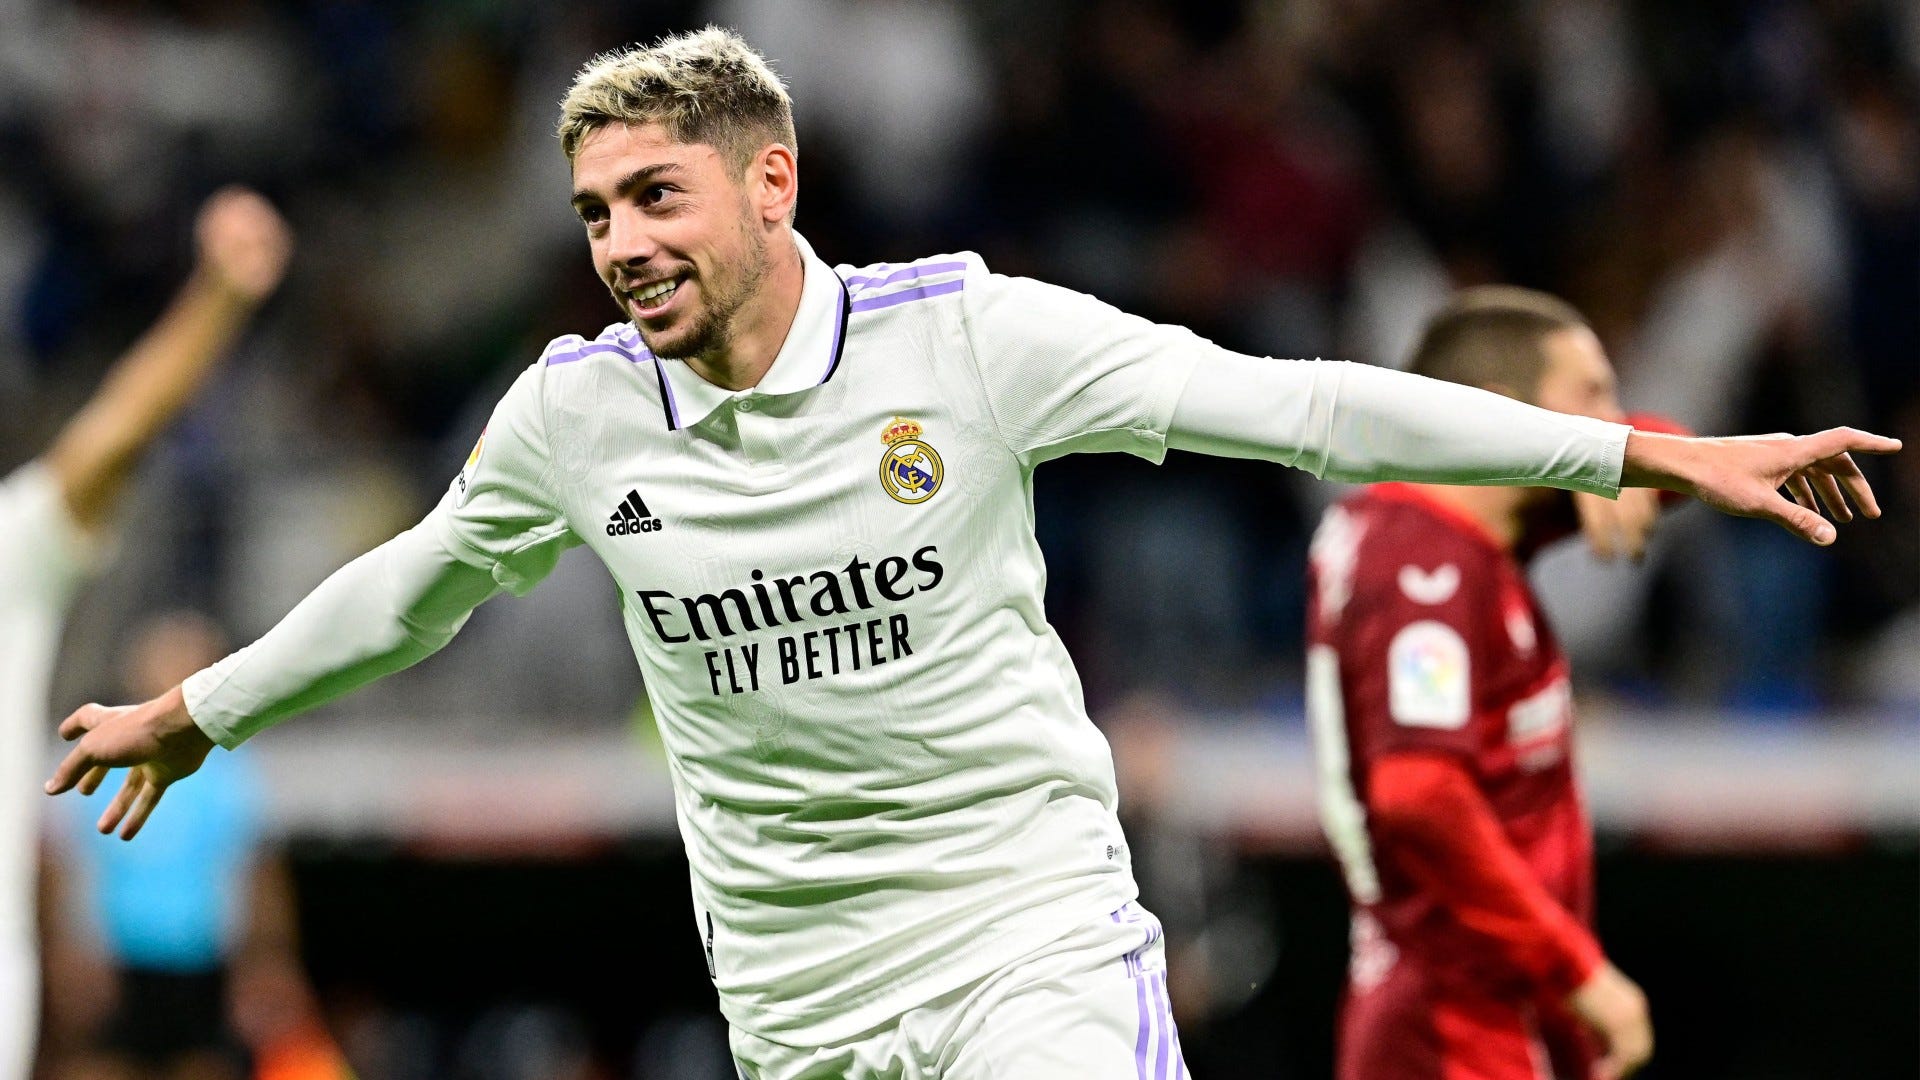 WATCH: Red-hot Valverde scores another stunner for Real Madrid | Goal.com US